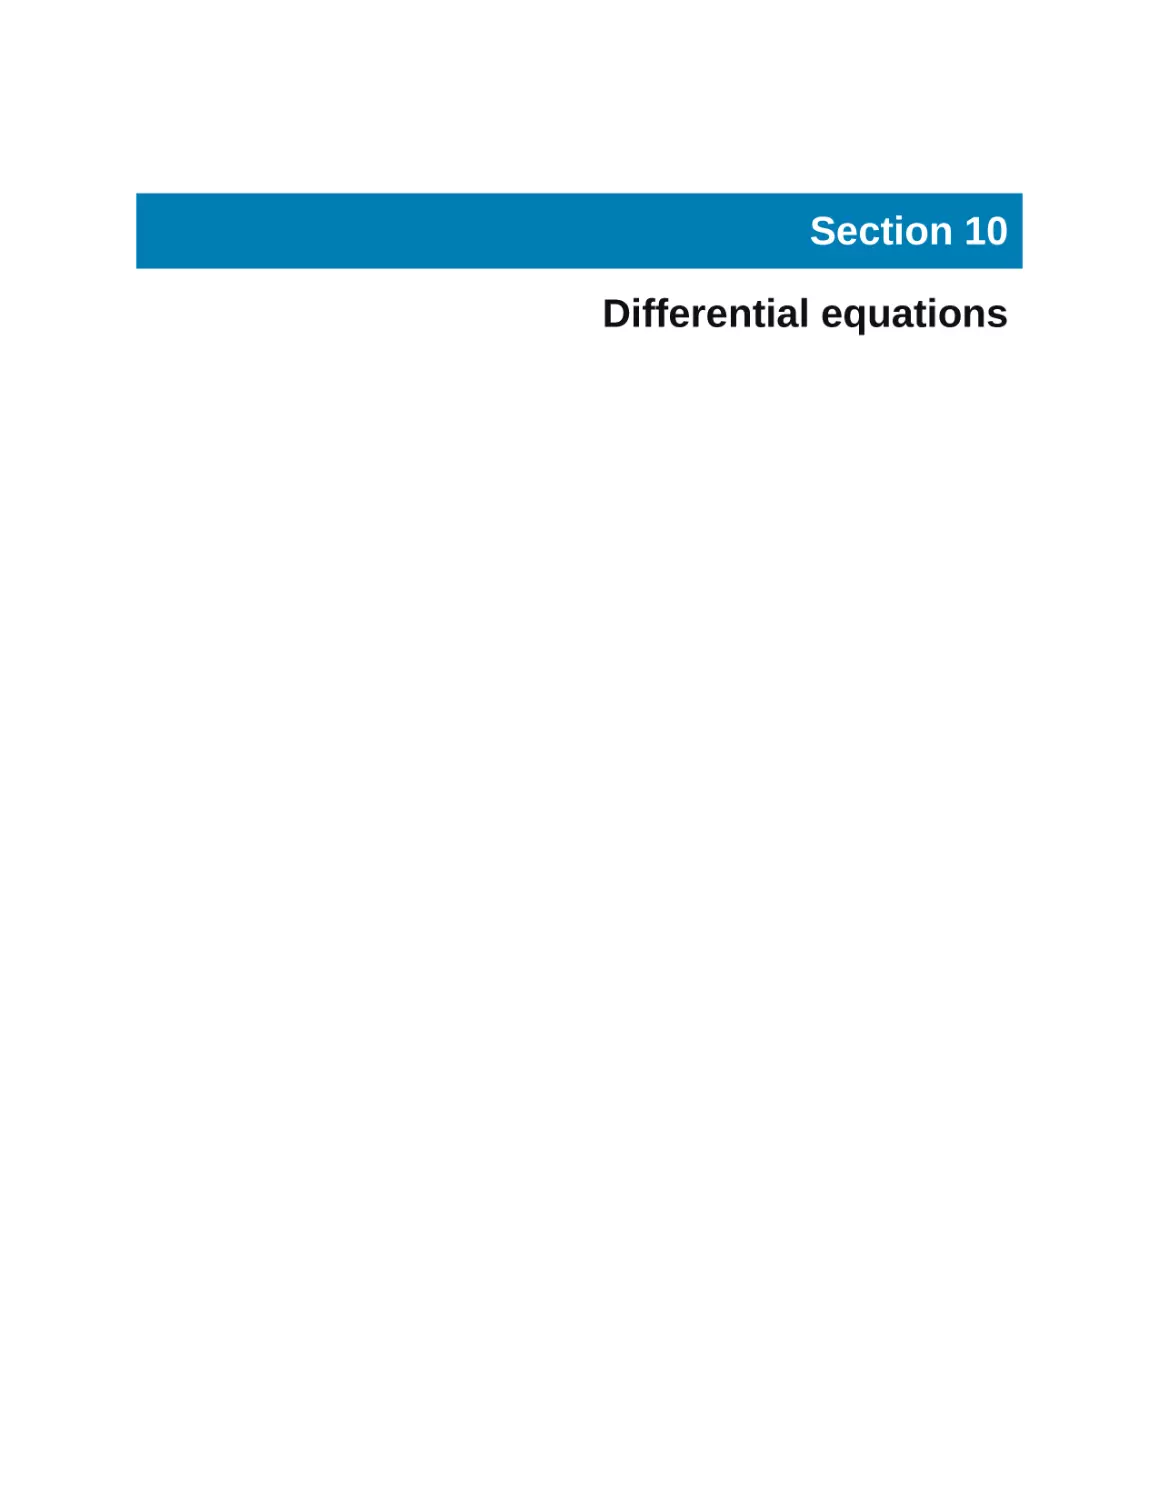 Section 10 Differential equations